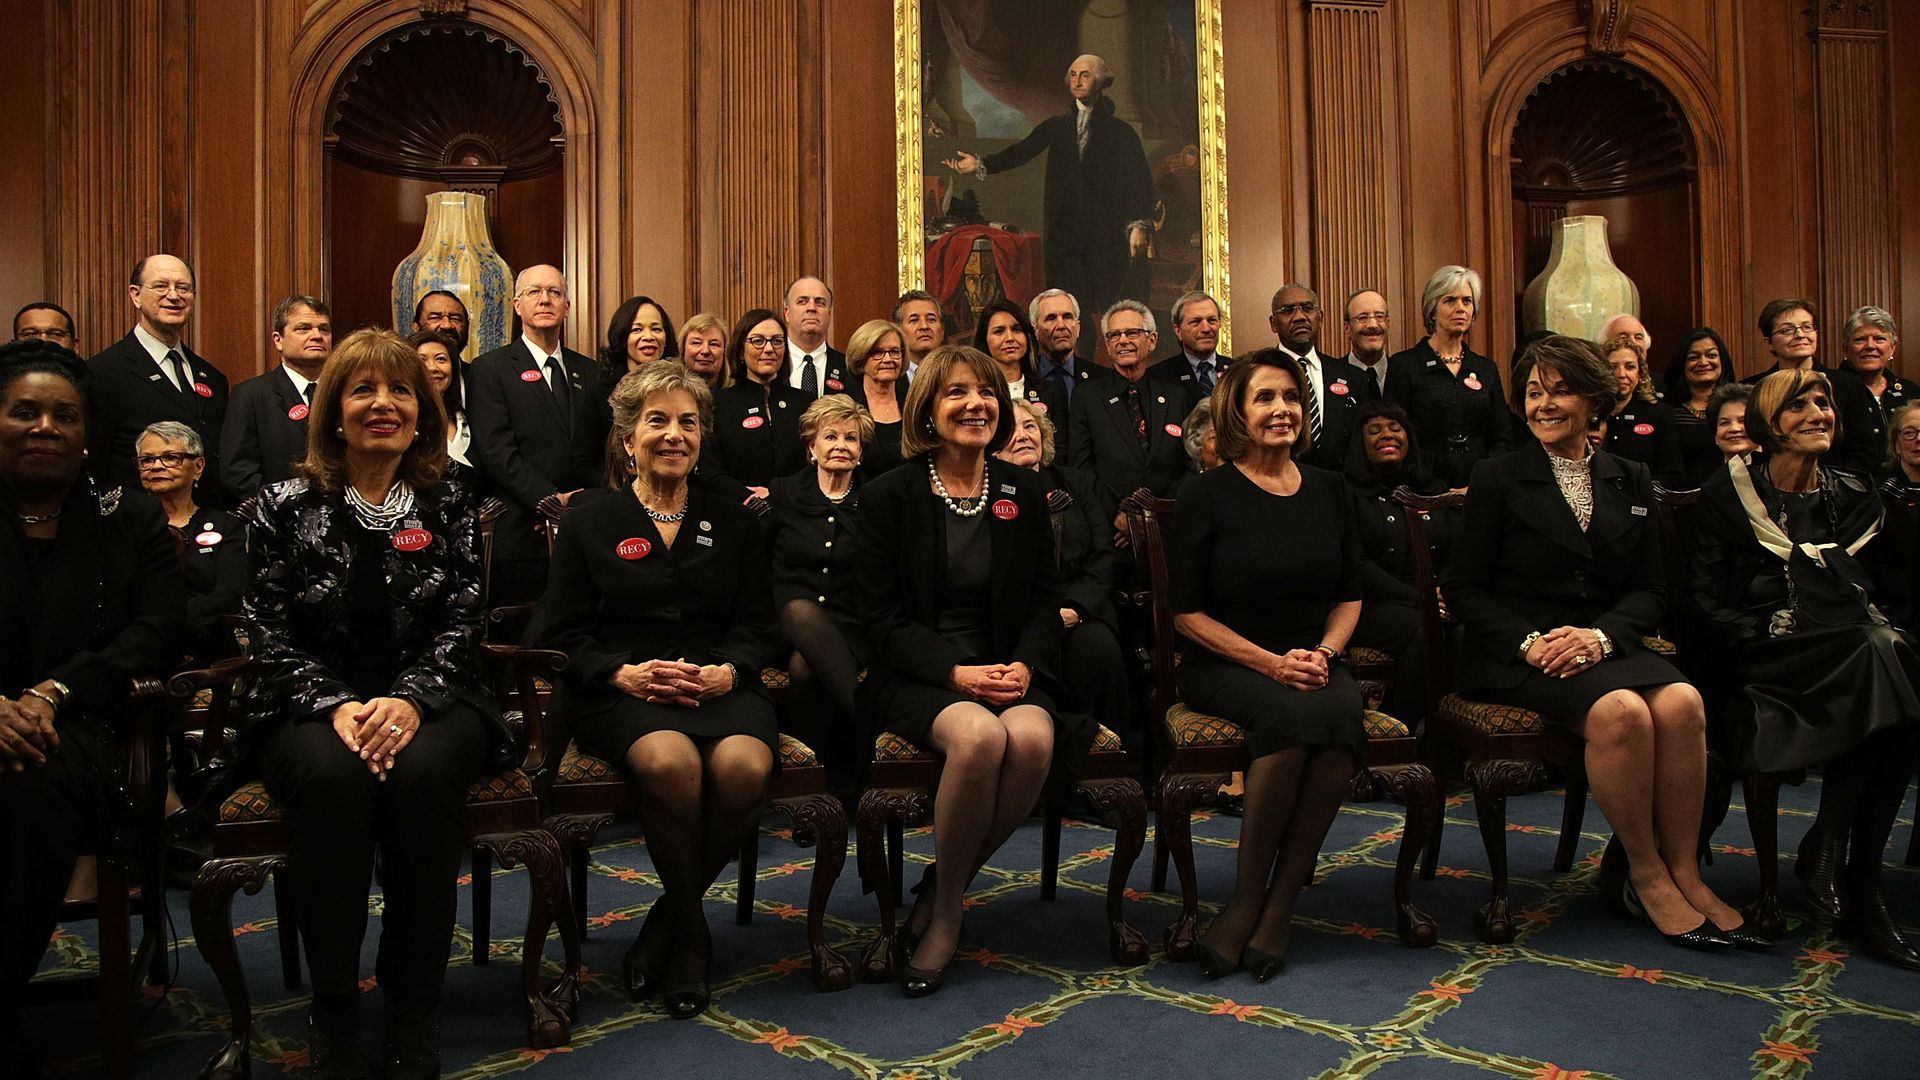 House Minority Leader Rep. Nancy Pelosi and other House Democrats wear black prior to President Donald Trump's first State of the Union address.